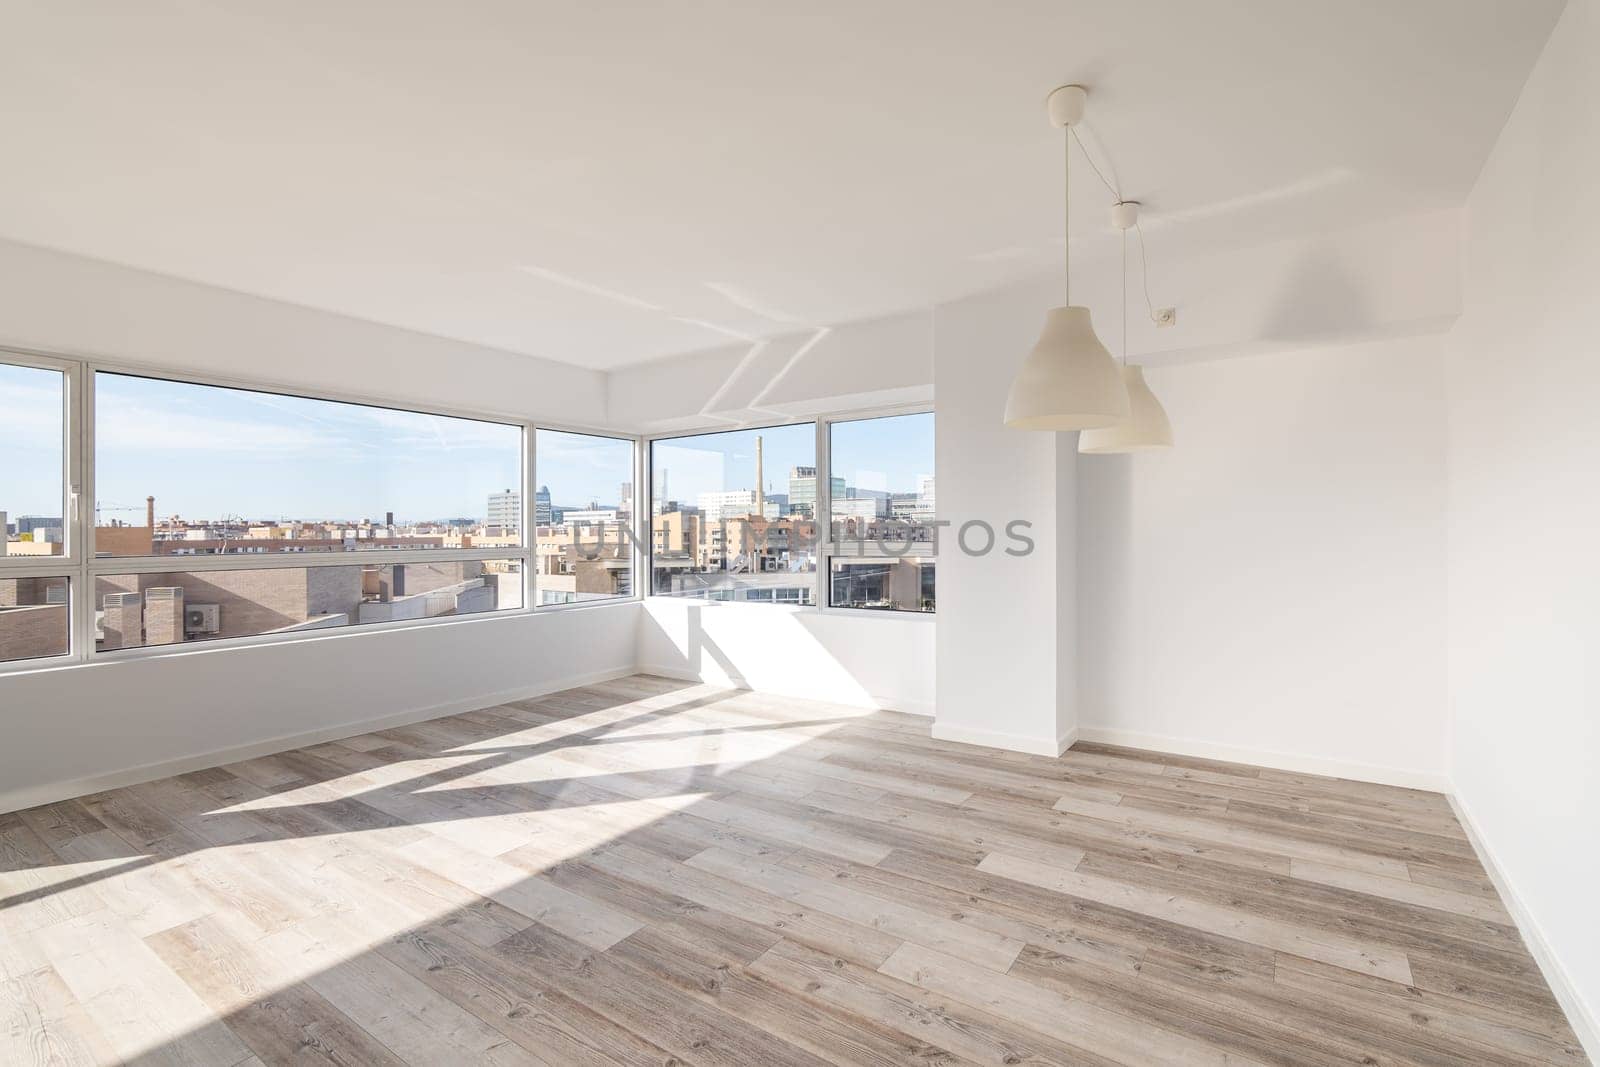 Spacious empty room with windows overlooking Barcelona. Designer apartment after renovation without furniture with wonderful view of city